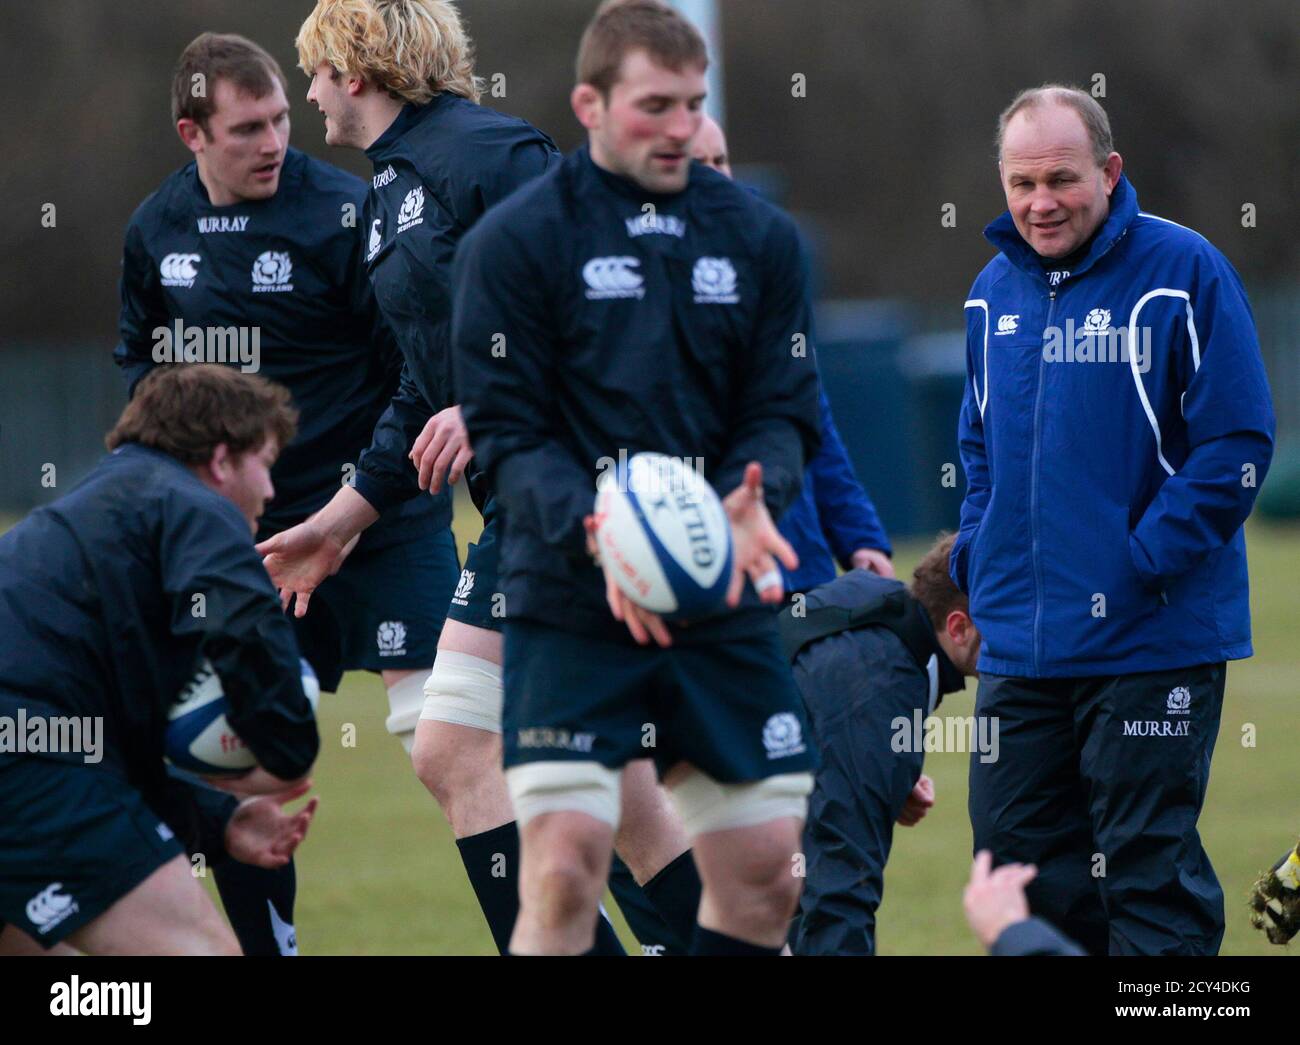 Scotland Rugby Union Coach Andy High Resolution Stock Photography and  Images - Alamy